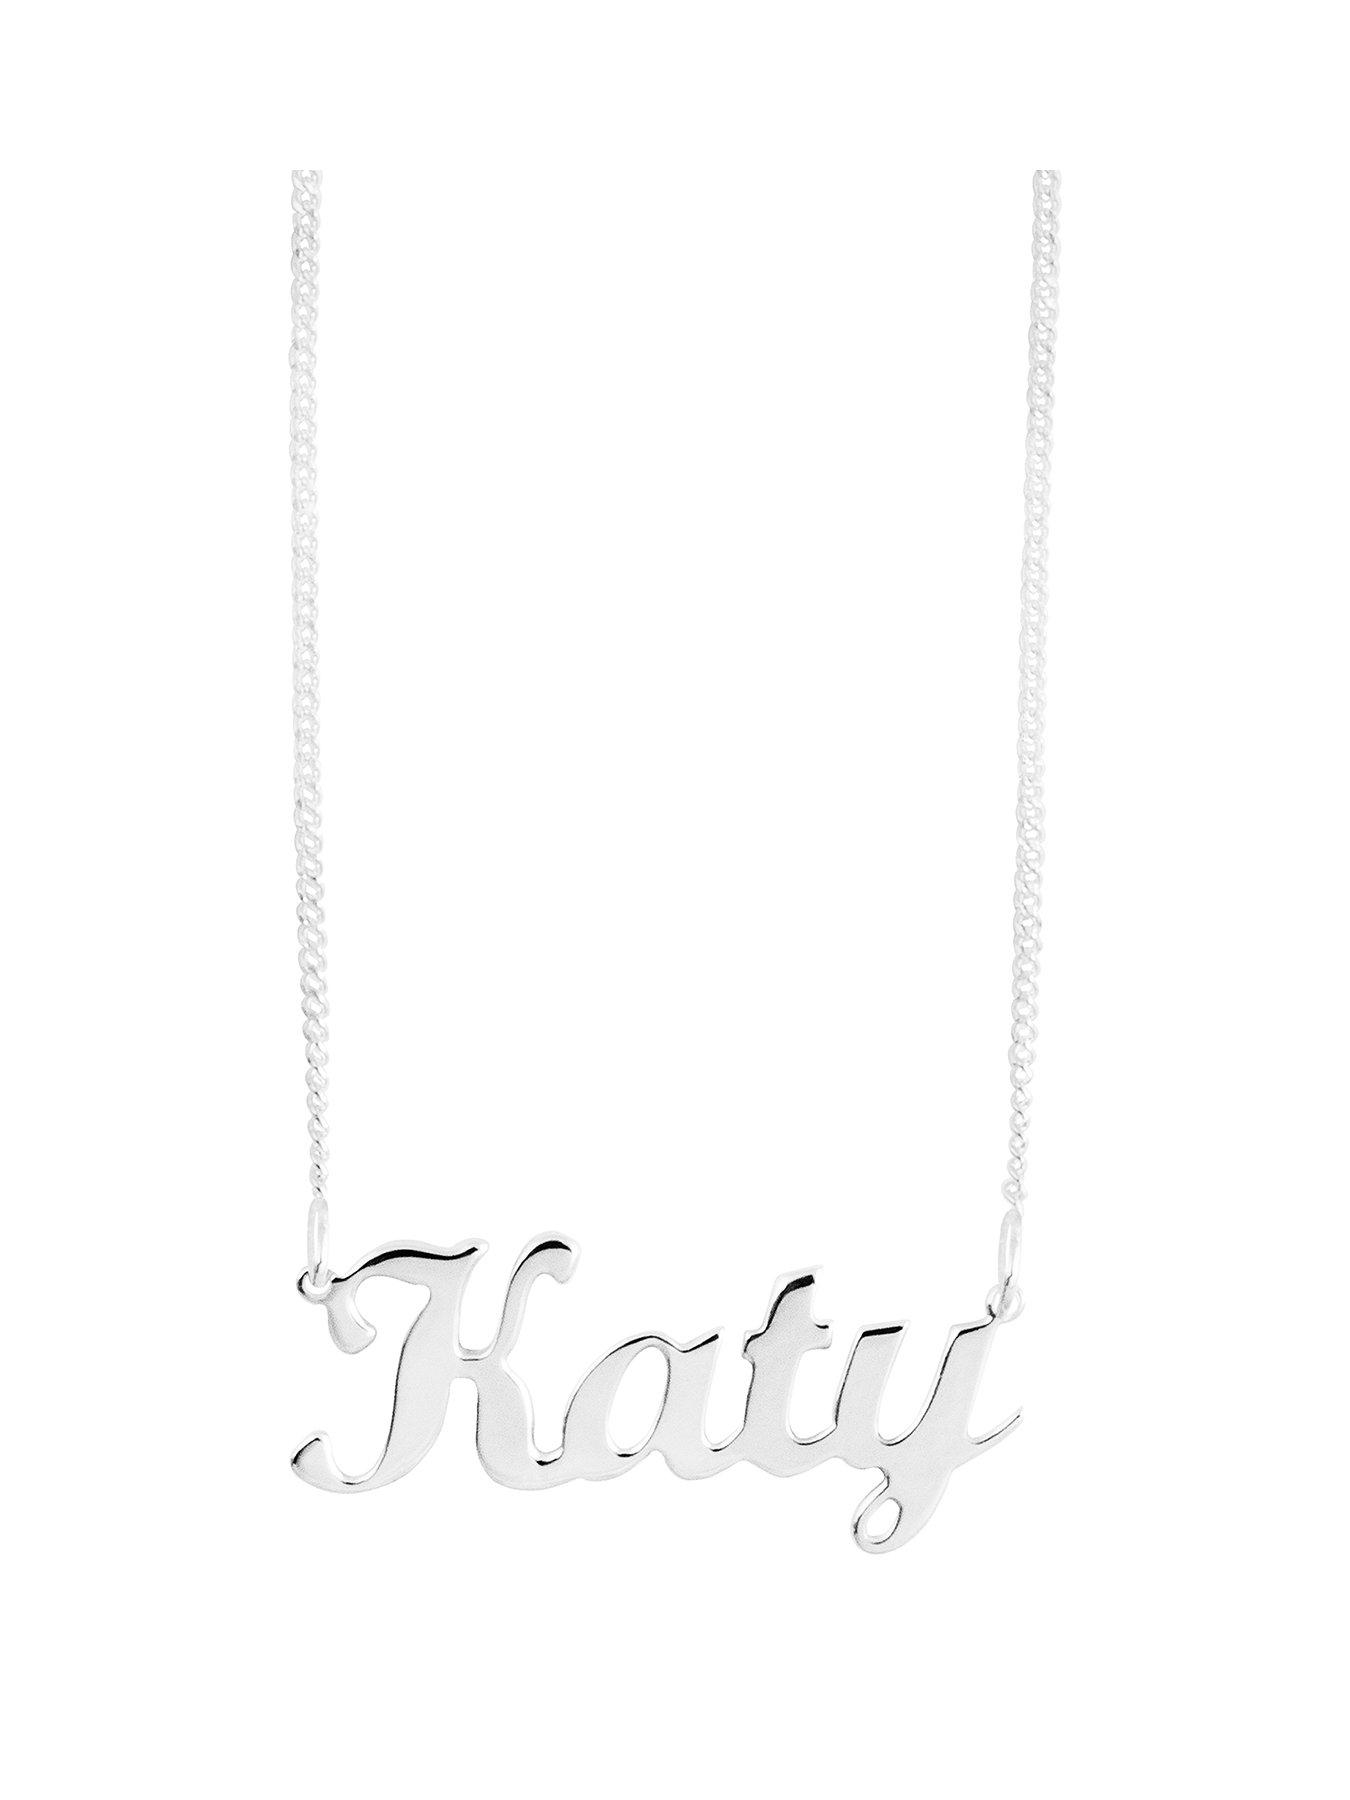 Details about   Personalized Sterling Silver 14KGold Any Name Plate Script Chain Necklace 48 STY 